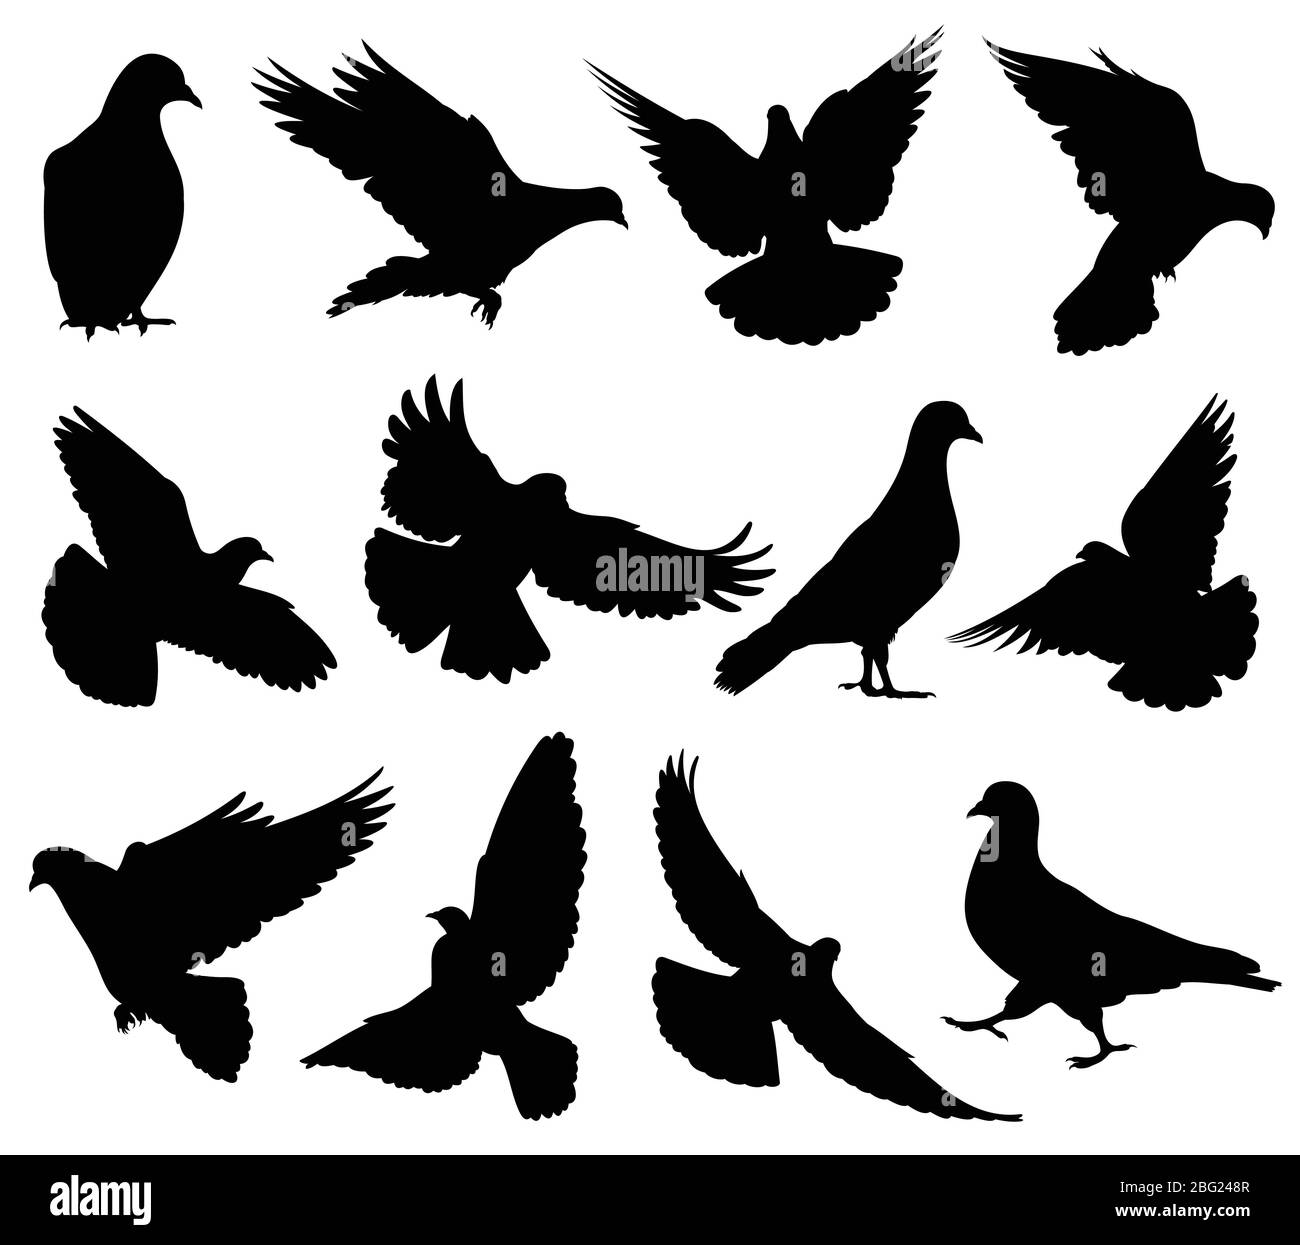 Flying dove vector silhouettes isolated. Pigeons set love and peace symbols. Black shape form dove and pigeon silhouette illustration Stock Vector